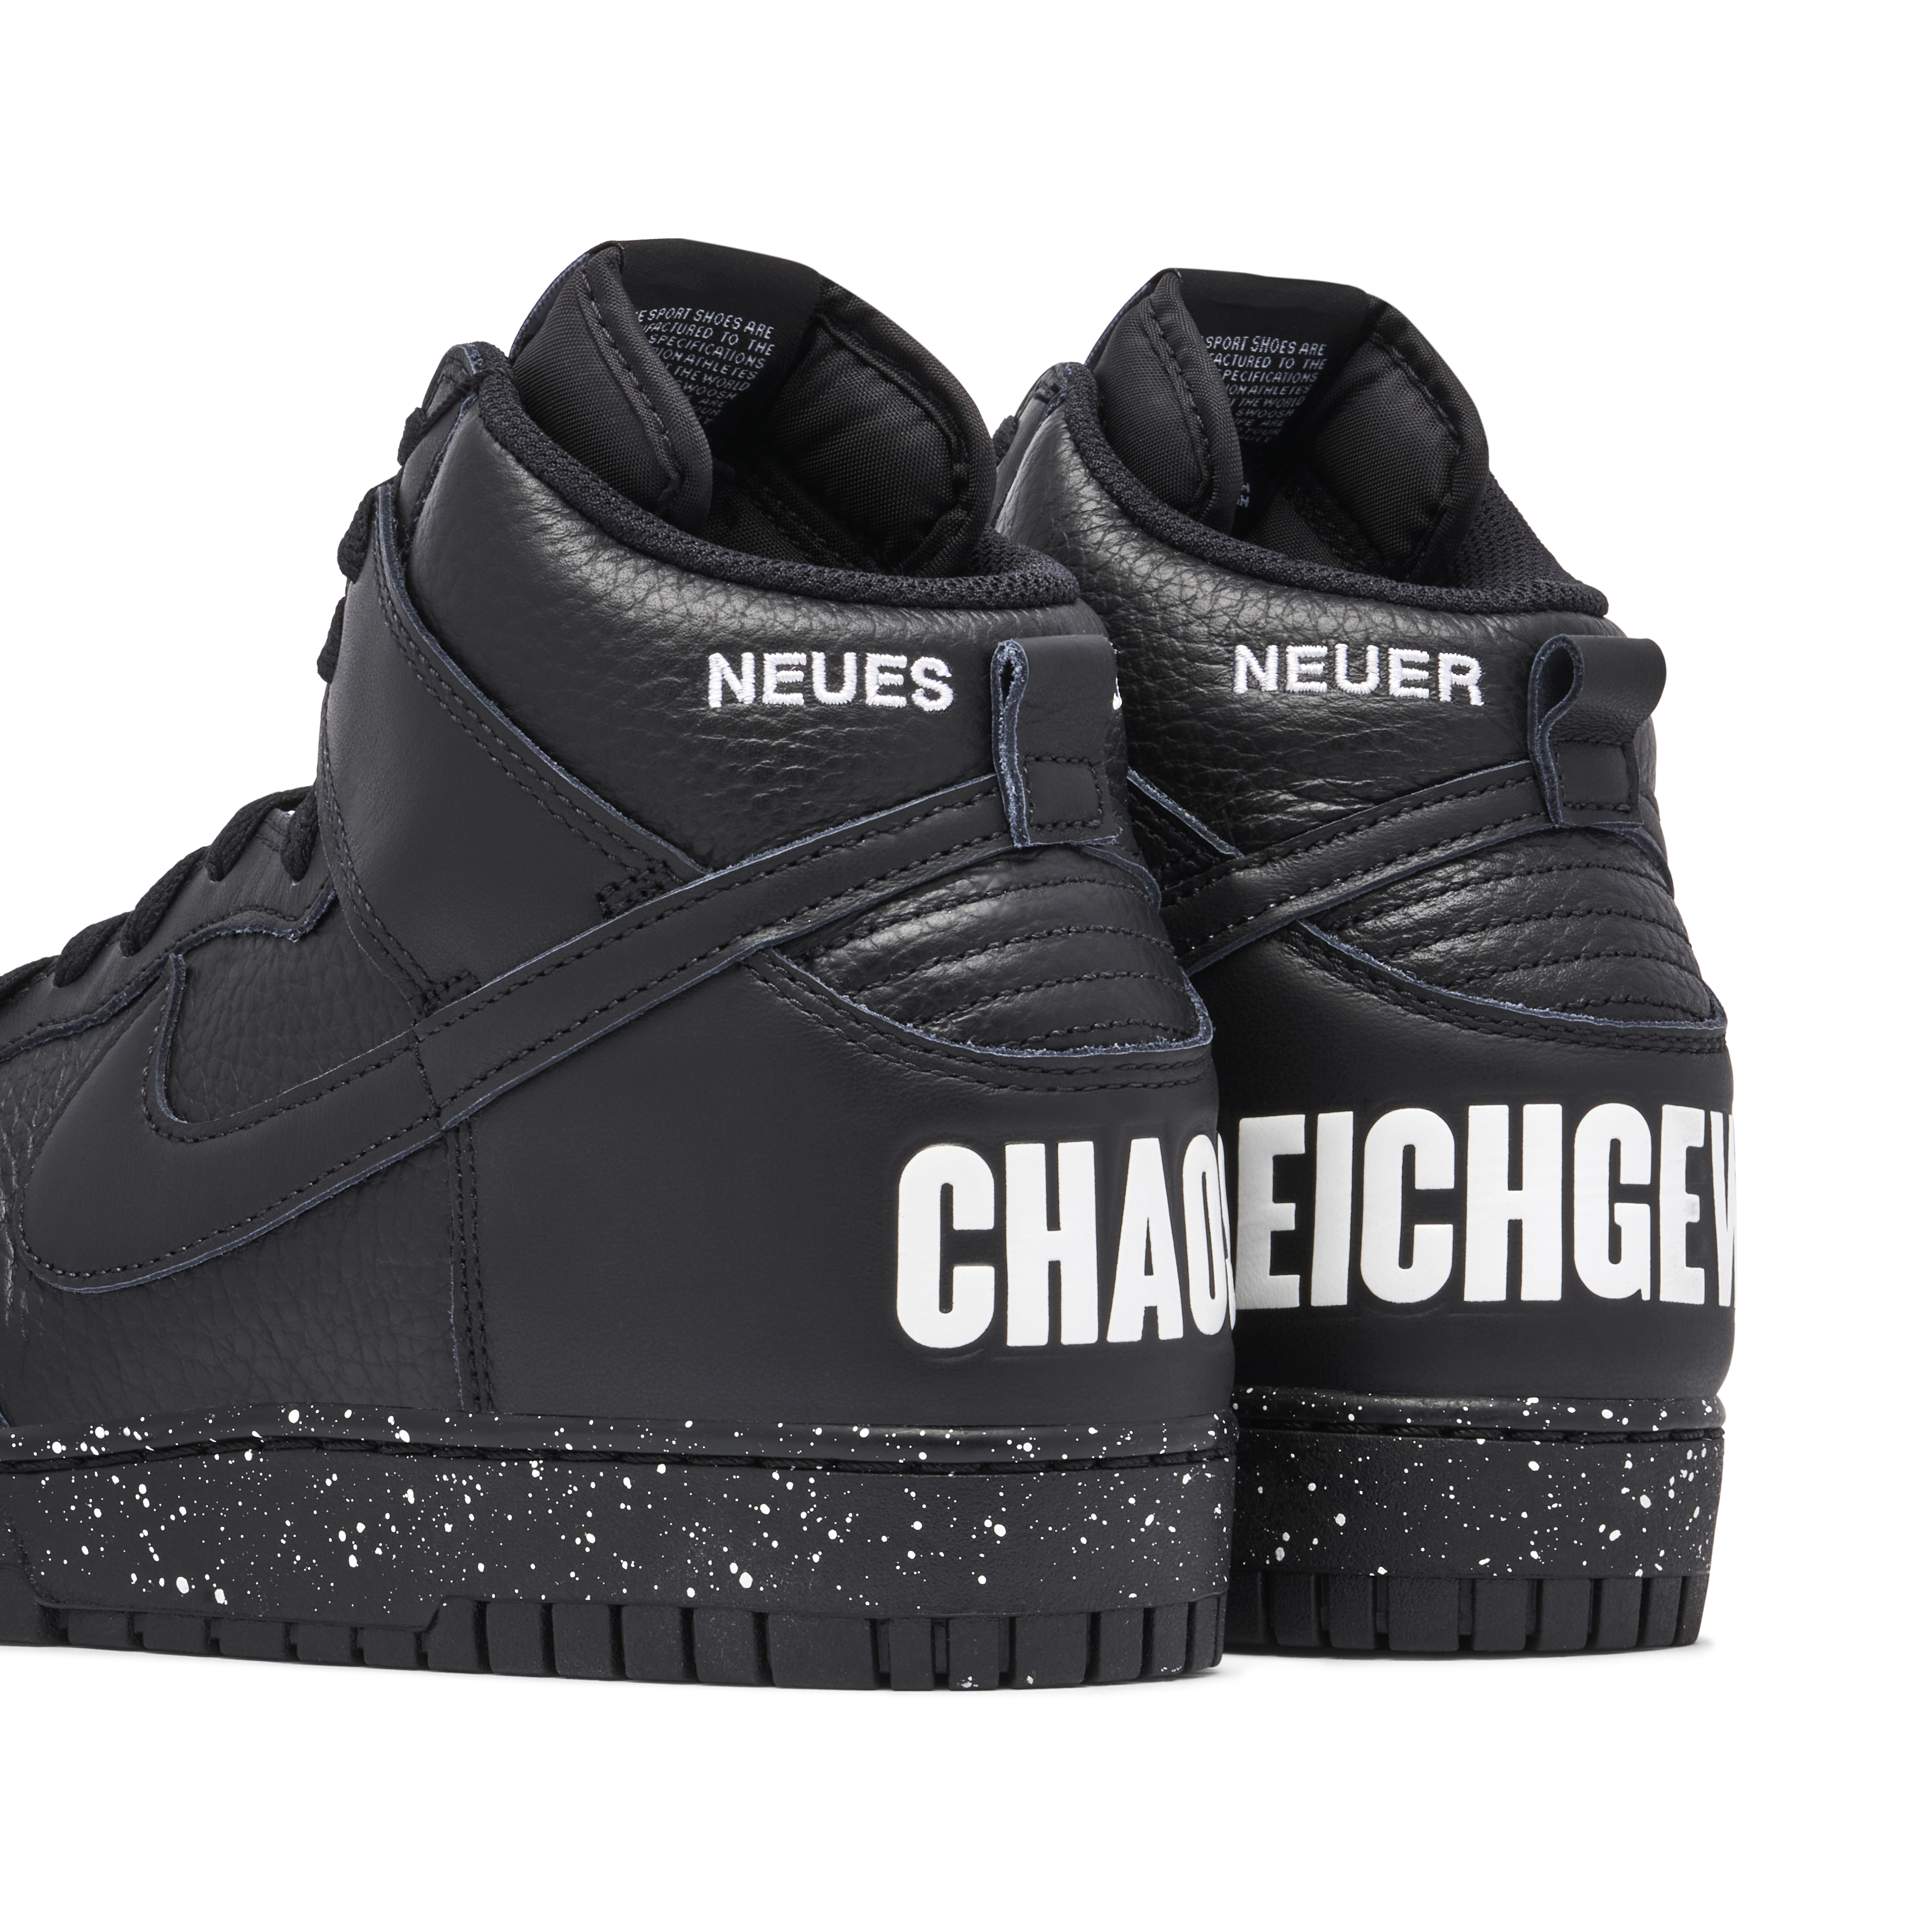 UNDERCOVER x Nike Dunk High Chaos Triple Black | DQ4121-001 | Laced